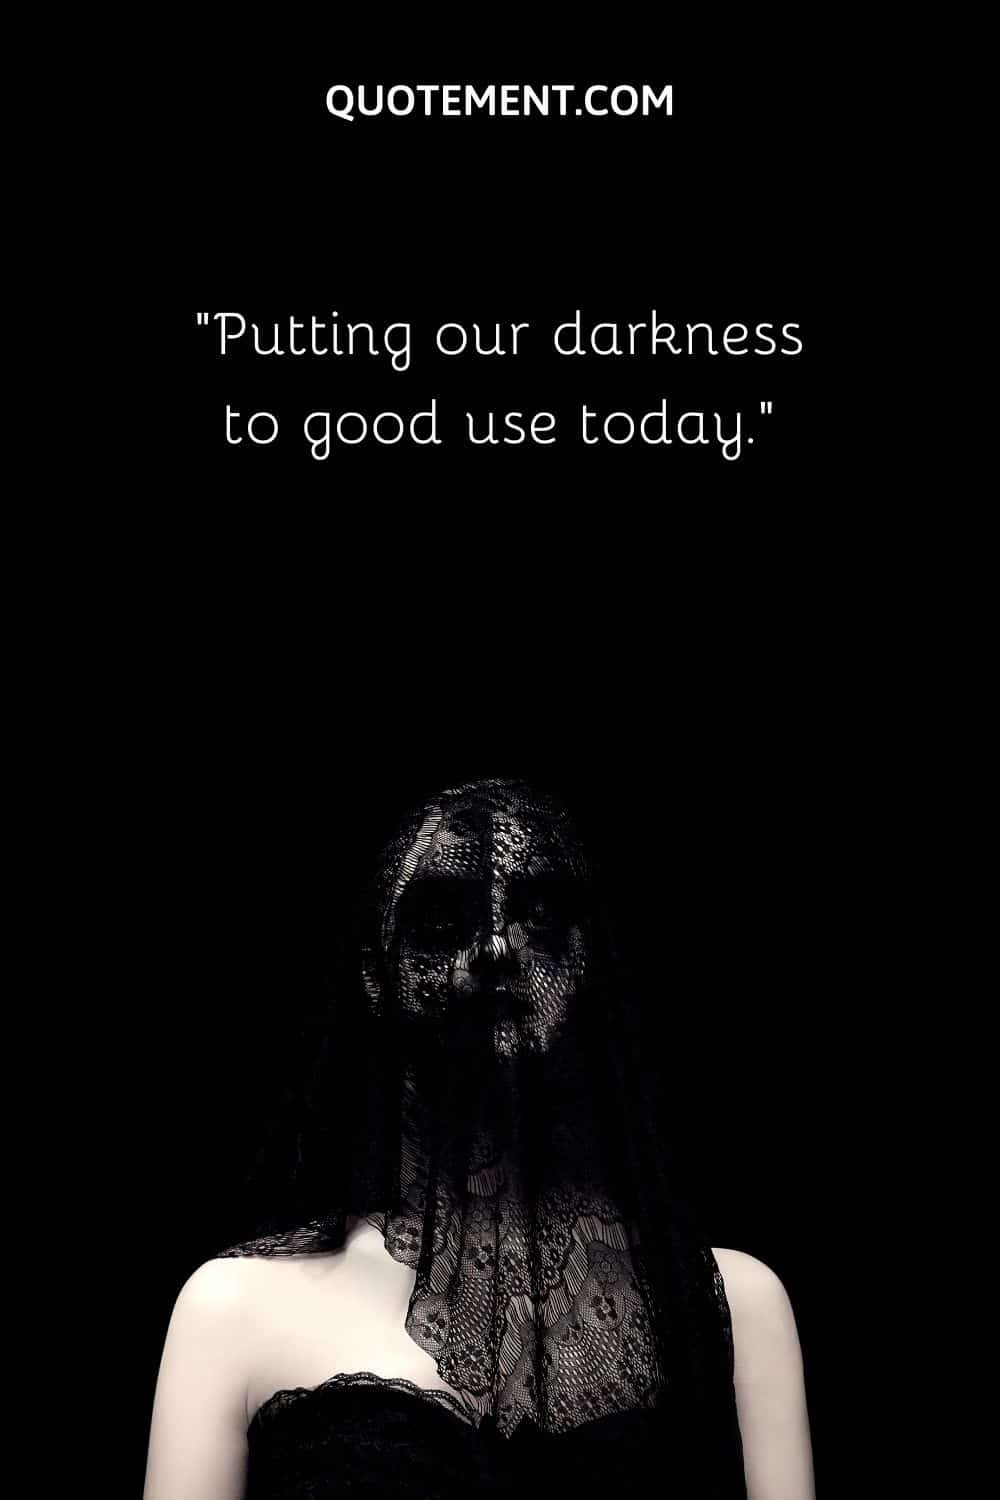 Putting our darkness to good use today